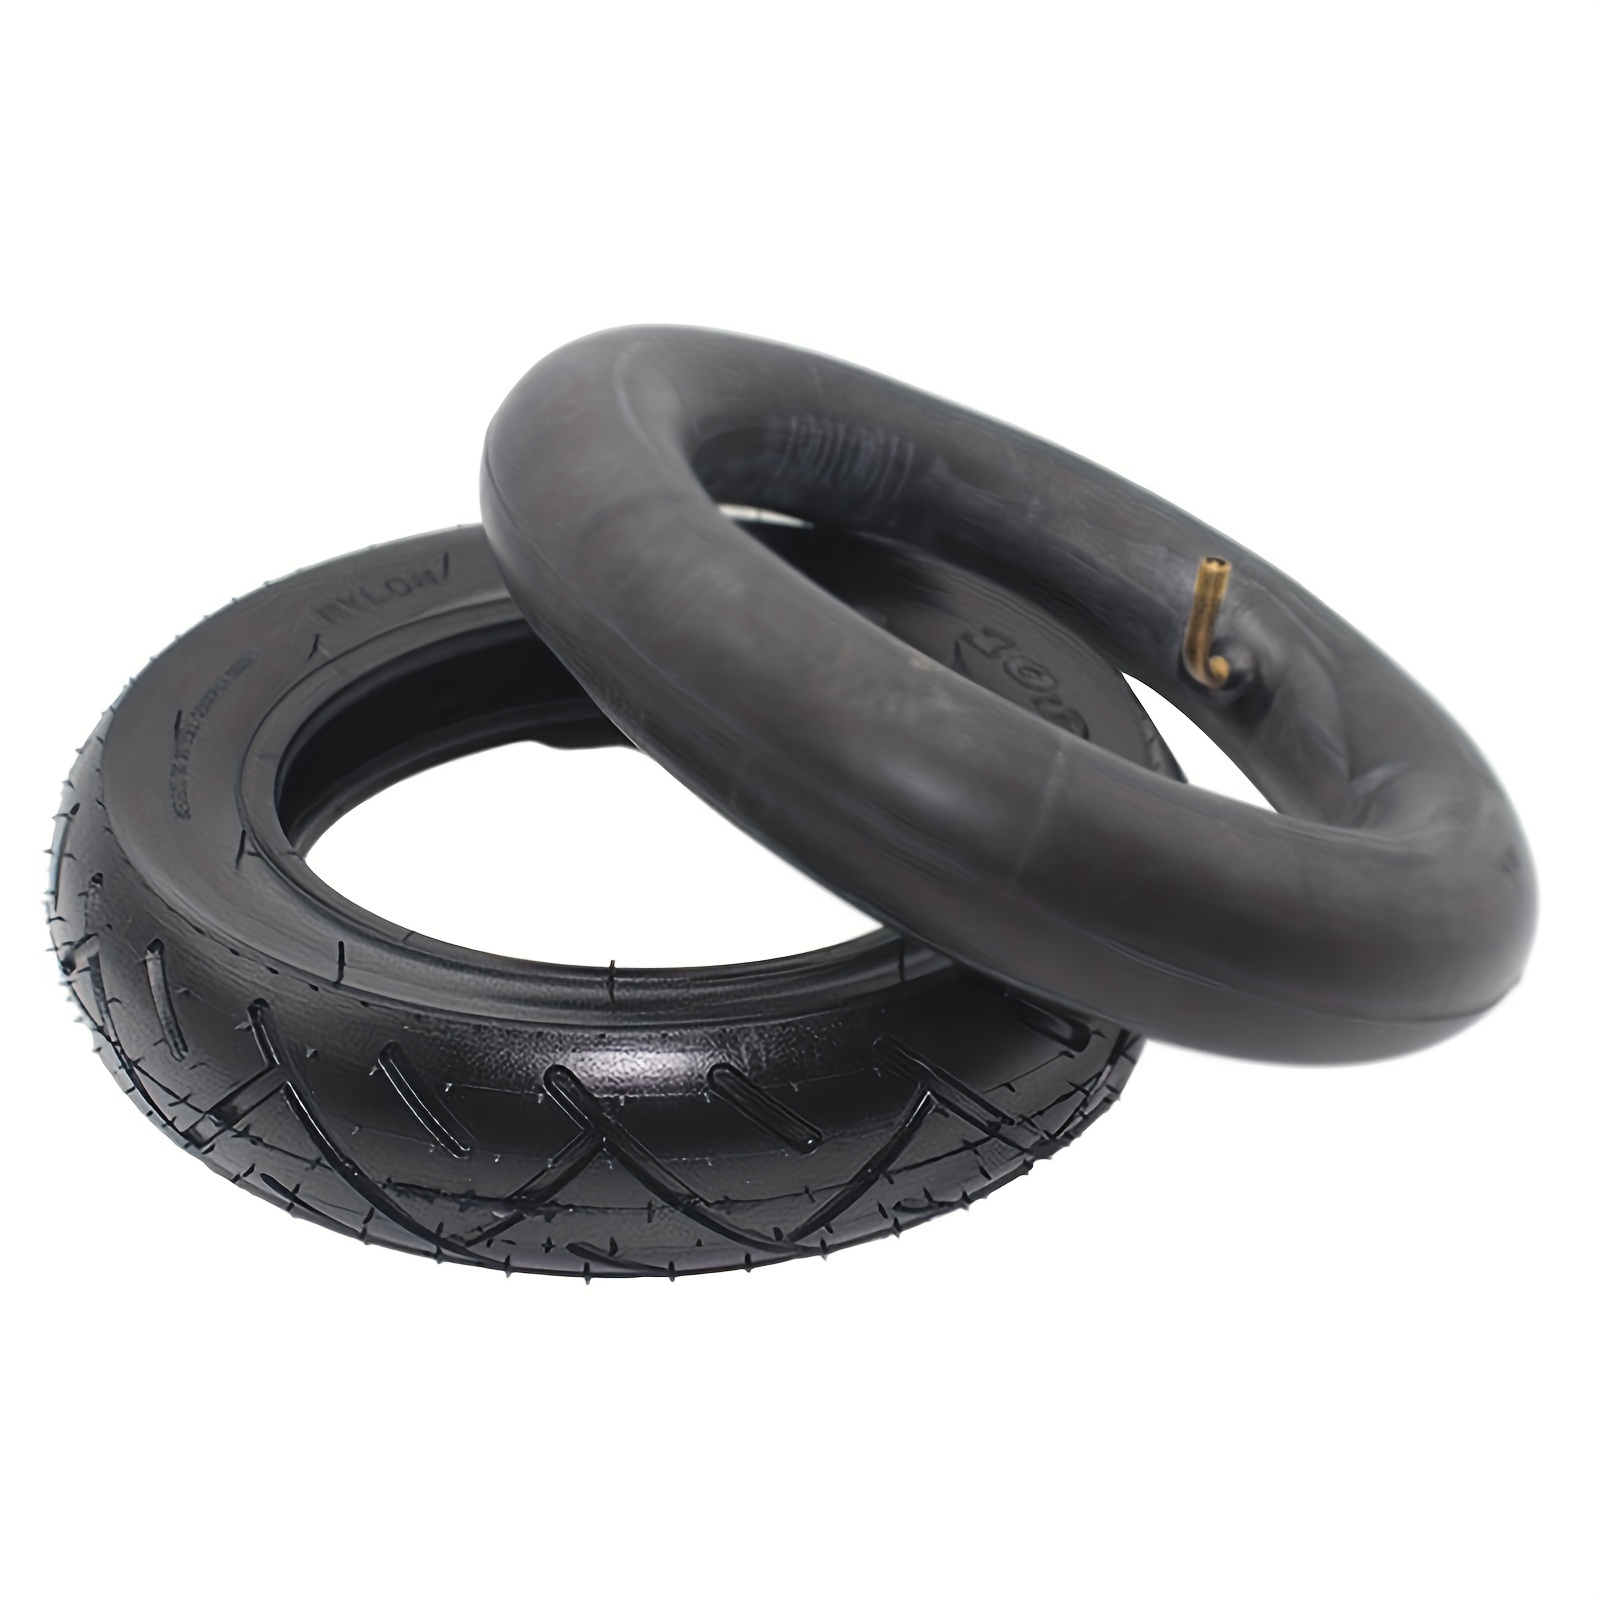 10 Inch 10x2.125 Inner Tube&outer Tyre for Electric Scooter Balancing Car 